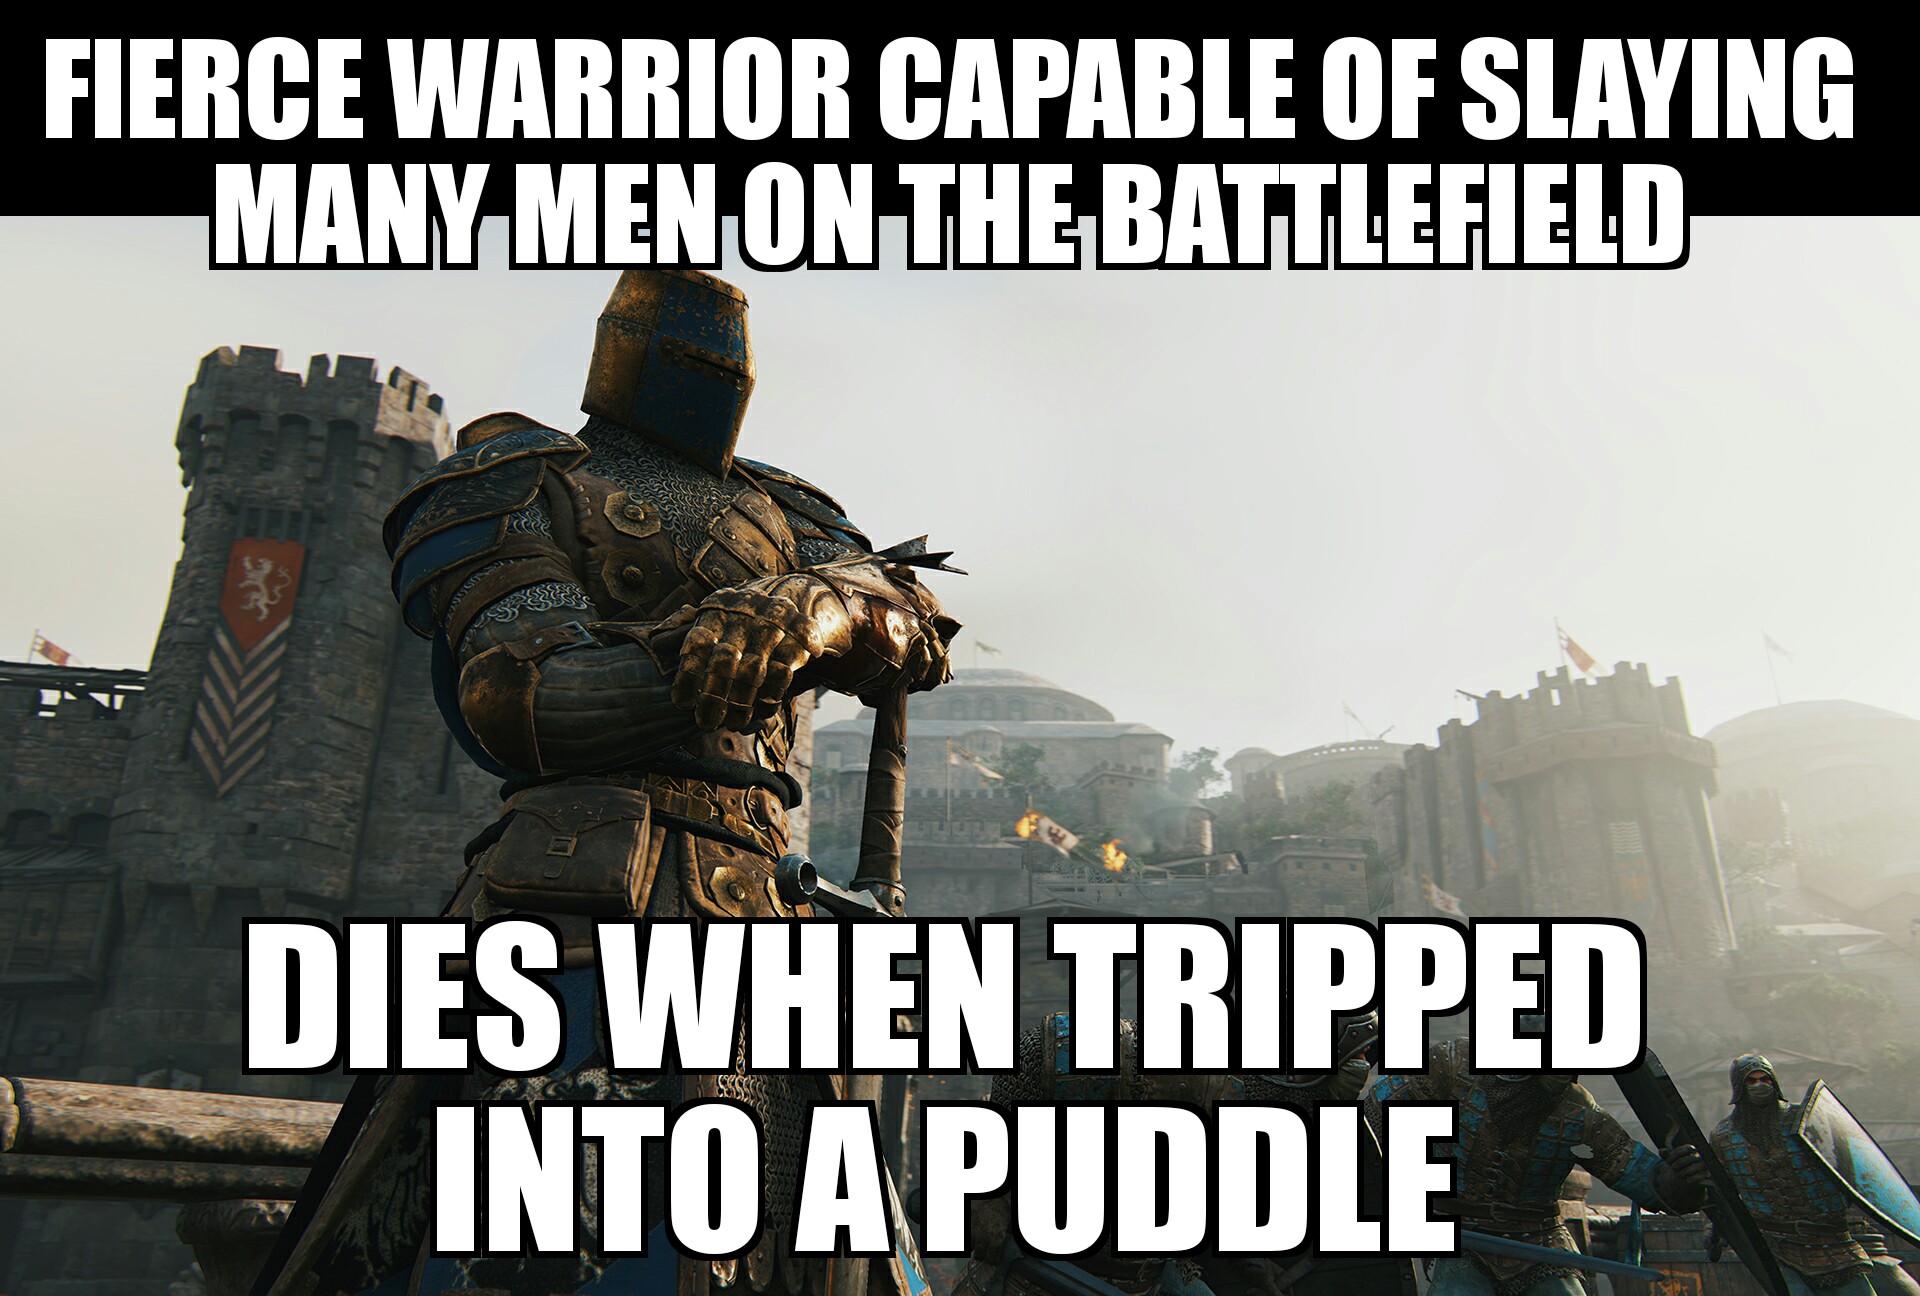 memes for honor - Fierce Warrior Capable Of Slaying Many Men On The Battlefield Co Dies When Tripped Into A Puddle